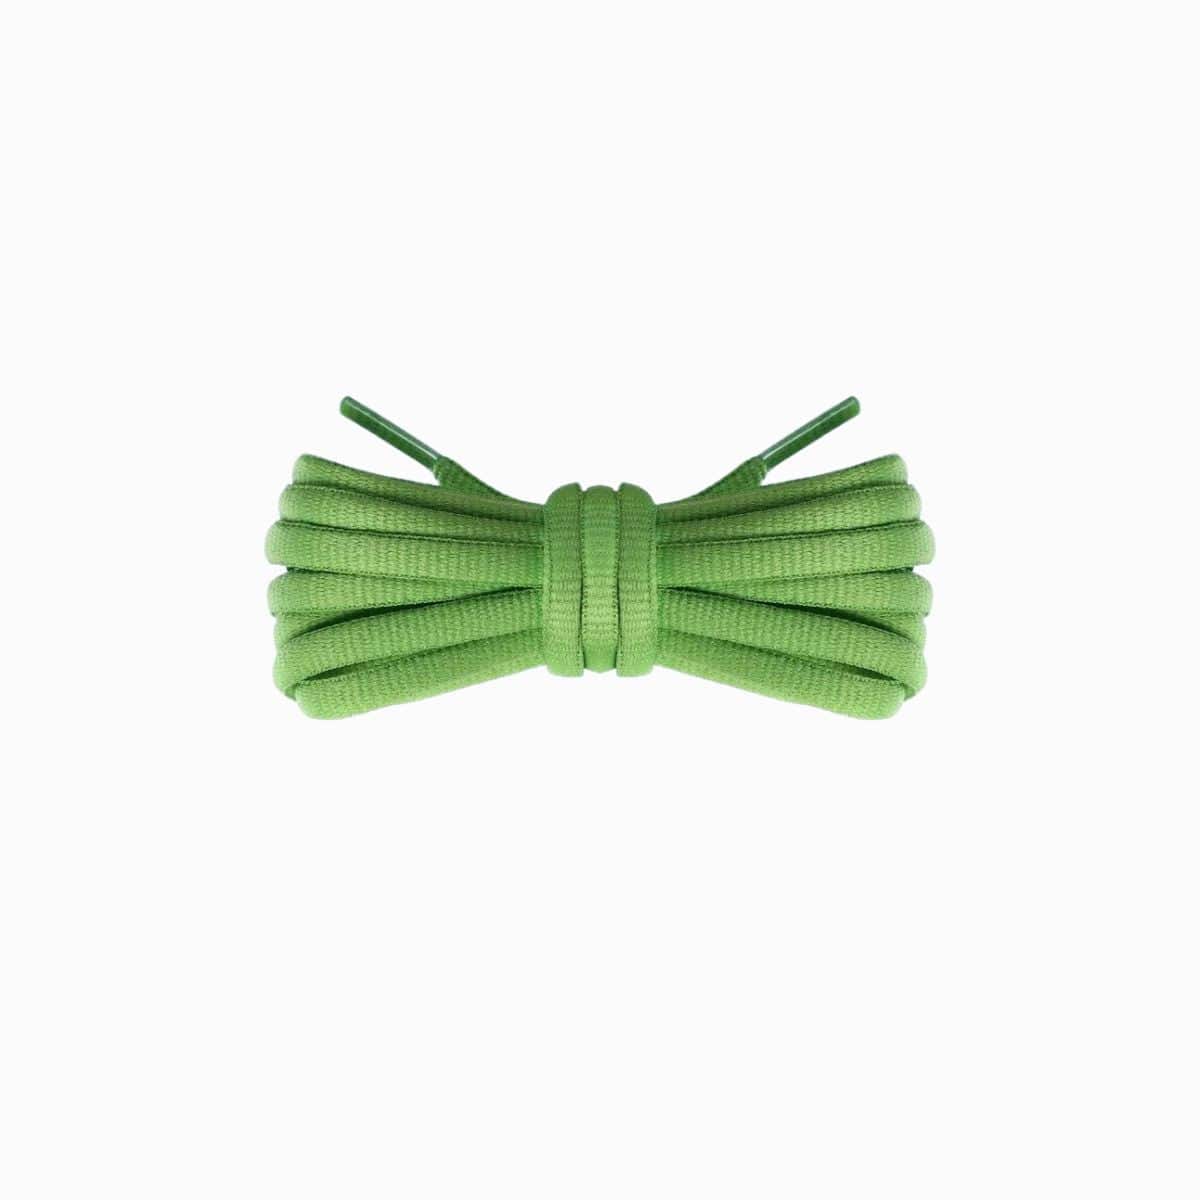 Avo Green Replacement Adidas Shoe Laces for Adidas Spezial Sneakers by Kicks Shoelaces